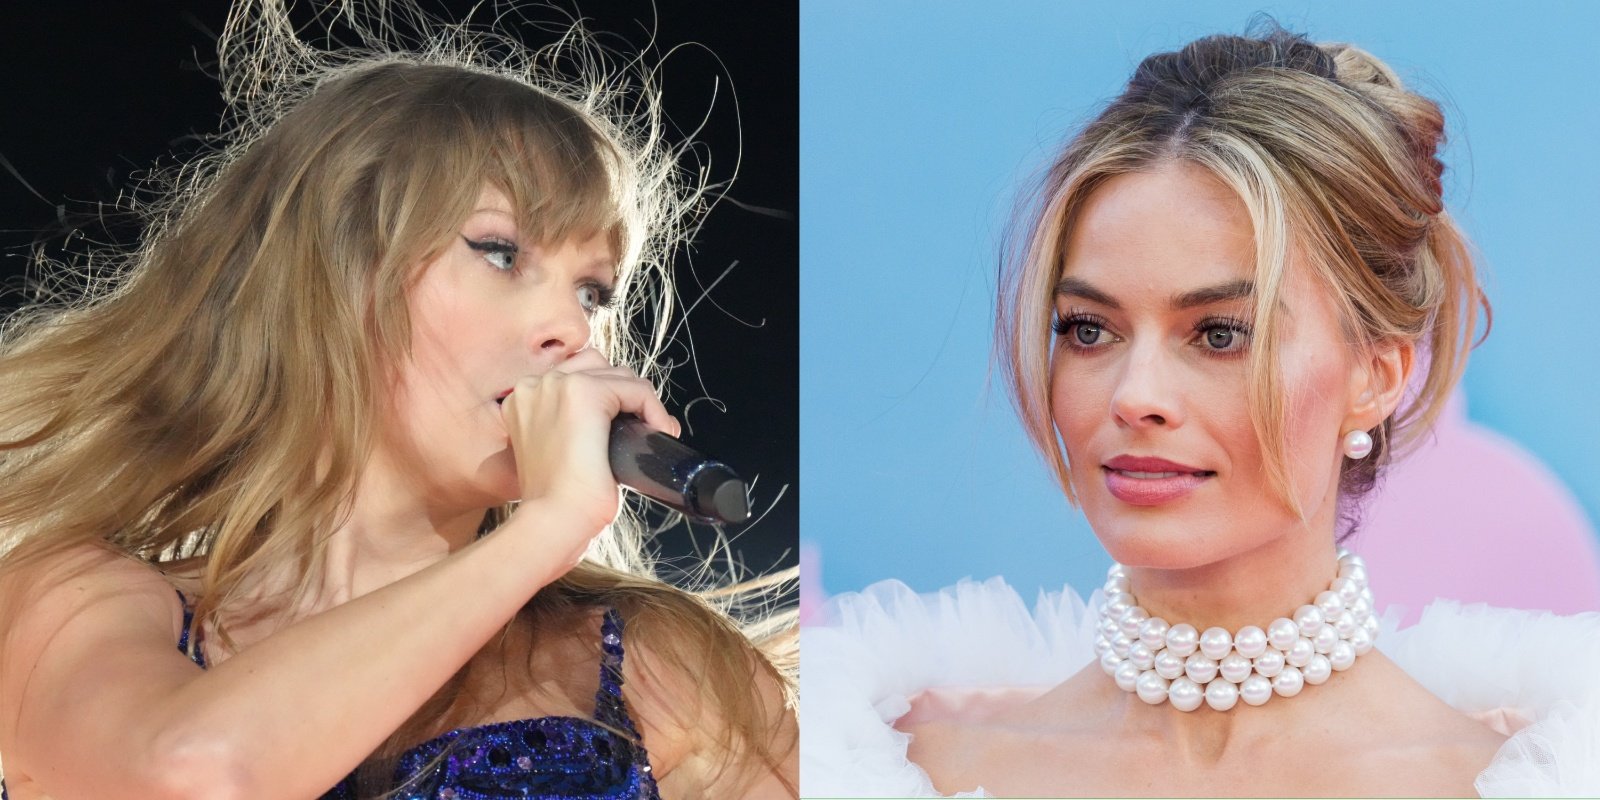 Taylor Swift and 'Barbie' star Margot Robbie in side-by-side photographs.